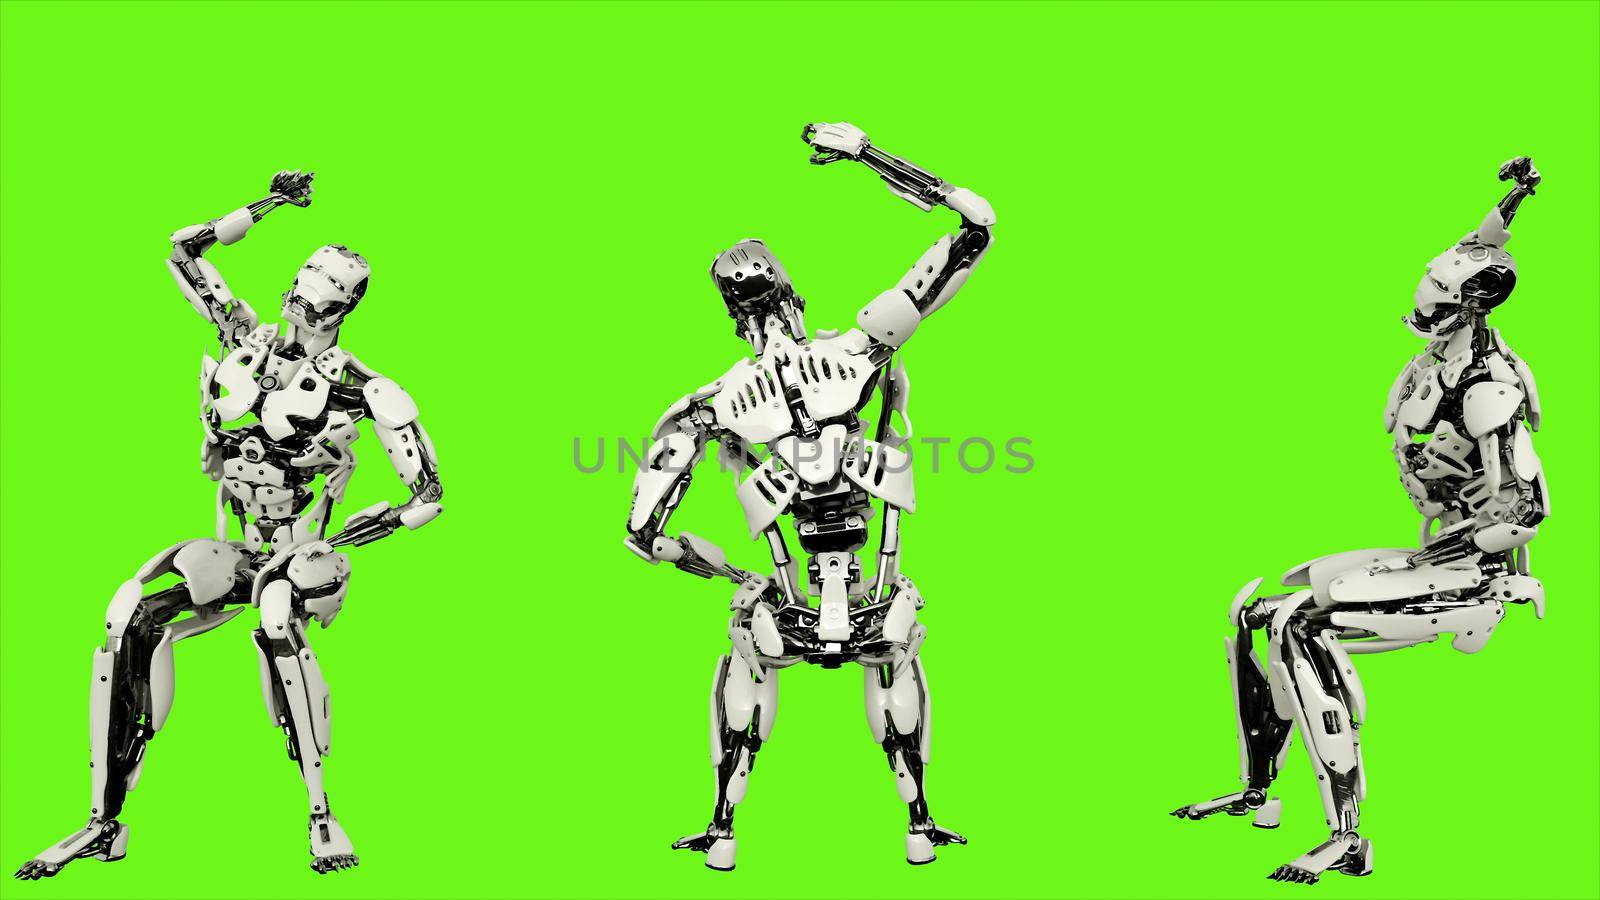 Robot android is cheering while sitting. Illustration on green screen background.